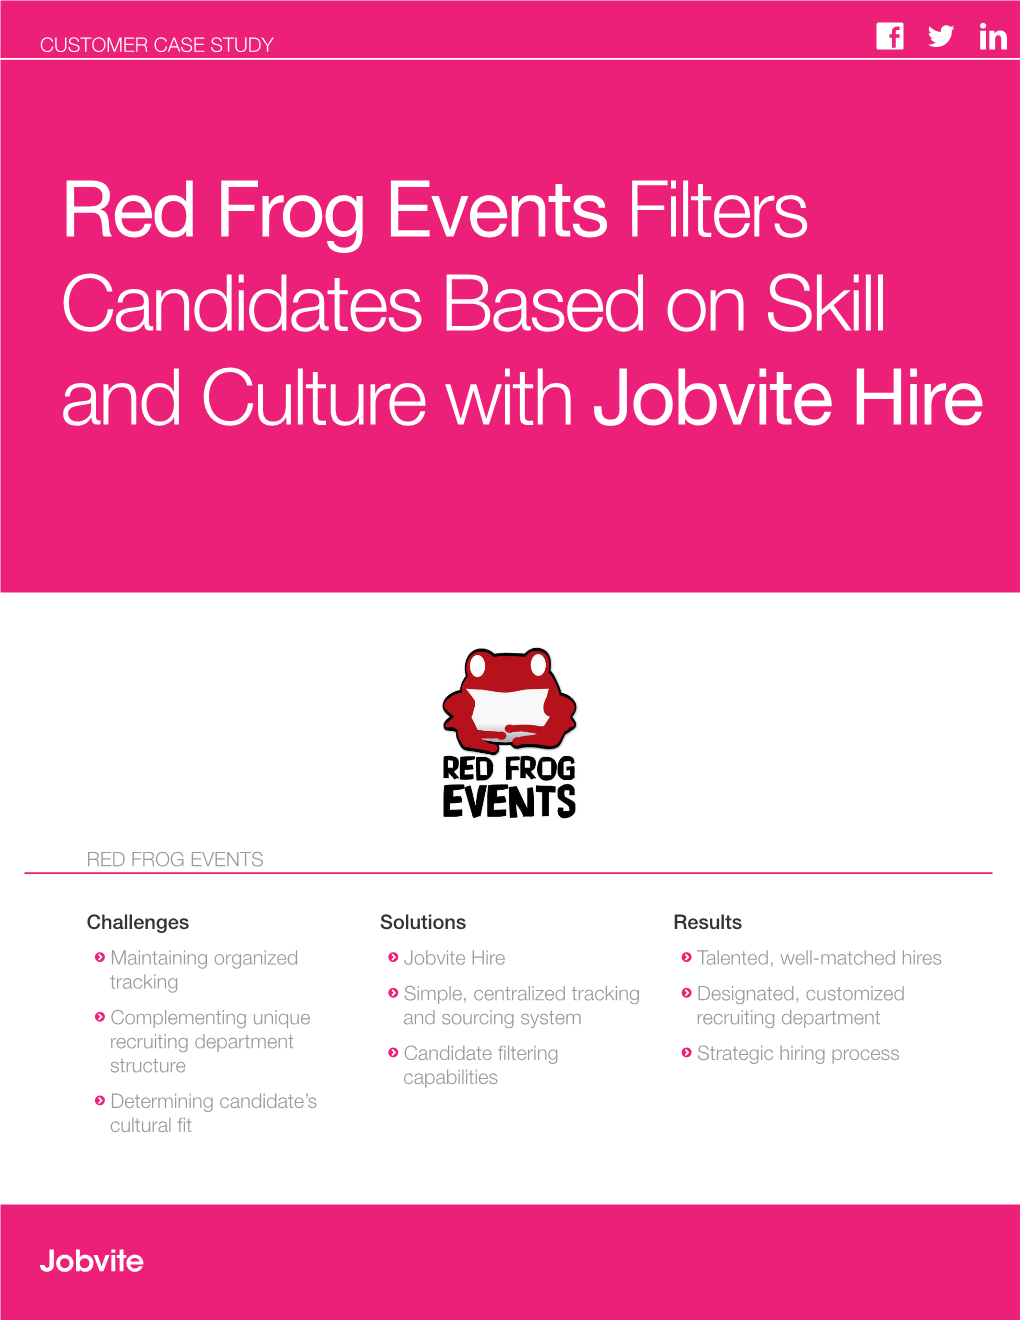 Red Frog Events Filters Candidates Based on Skill and Culture with Jobvite Hire